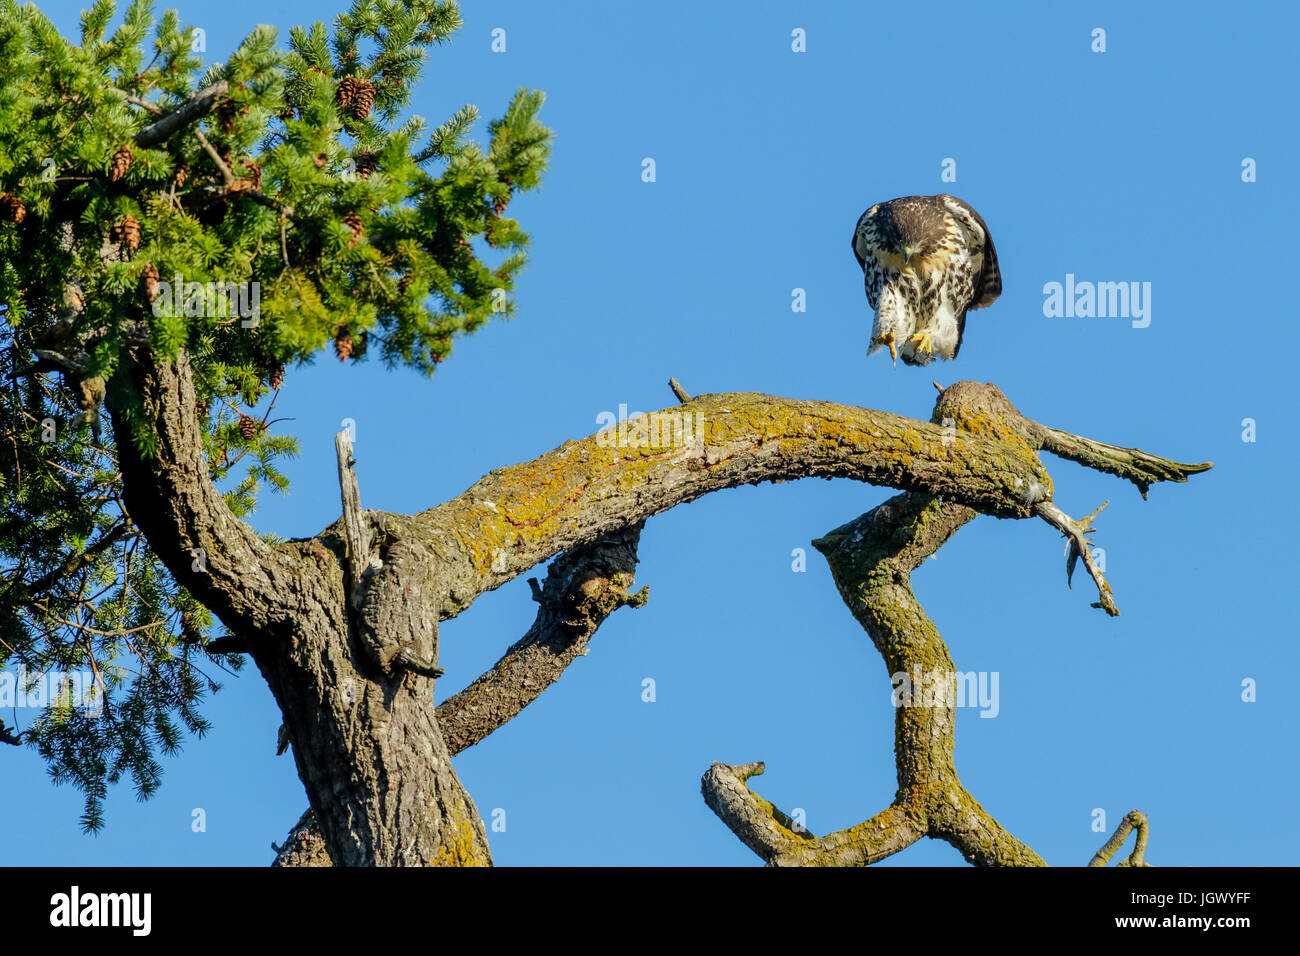 Juvenile recently fledged Red Tailed hawk from Robert's Bay eagle nest jumping from branch on Douglas Fir tree-Sidney, British Columbia, Canada. Stock Photo